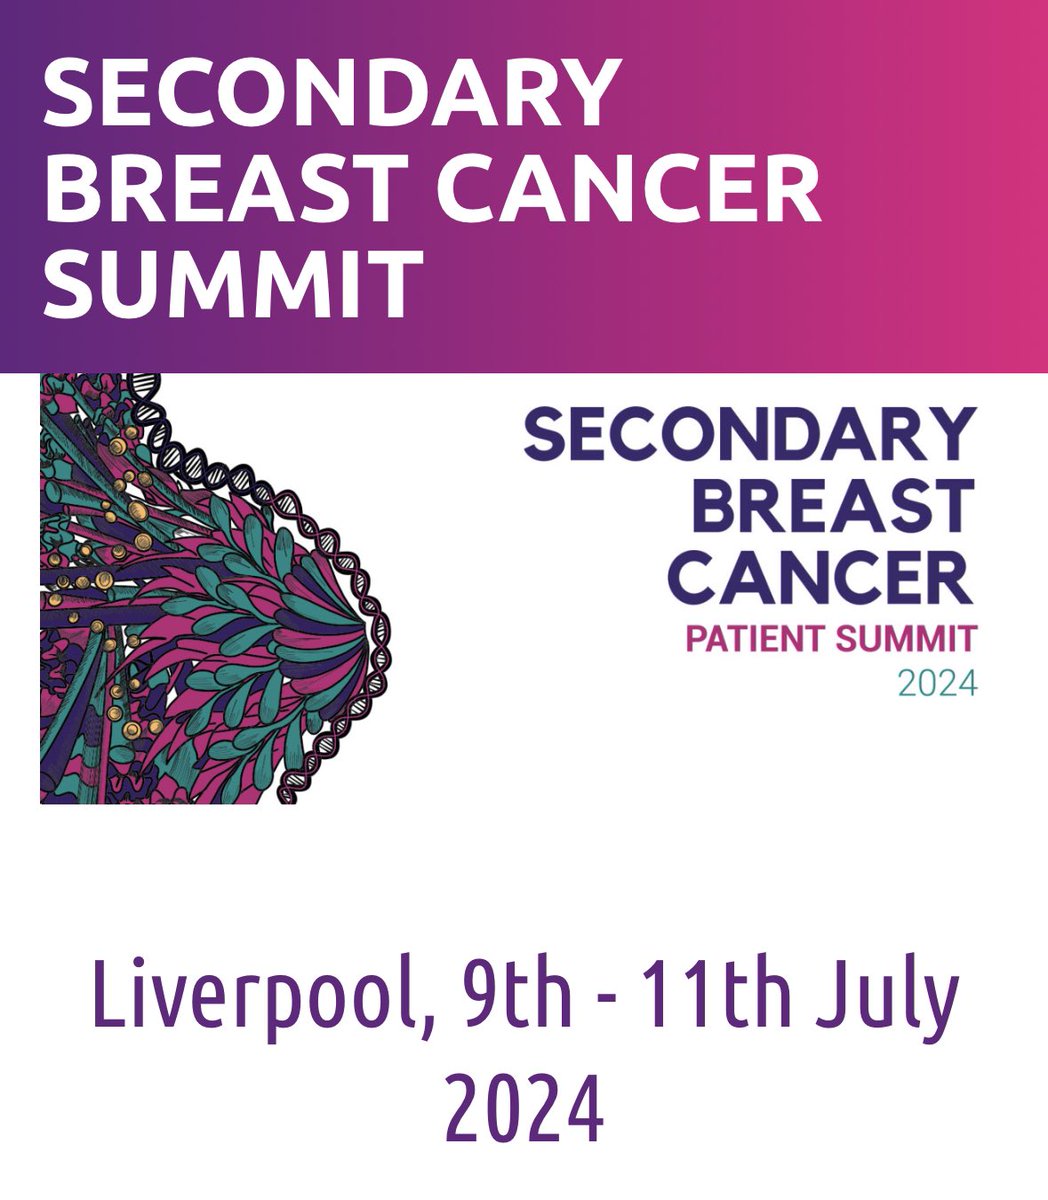 All places funded for women & men living with secondary breast cancer to attend this first of a kind event, & availability to watch online. Grateful to @LesleycStephen @Make2ndsCount real team effort to make this happen. Very grateful to our funders for their support.